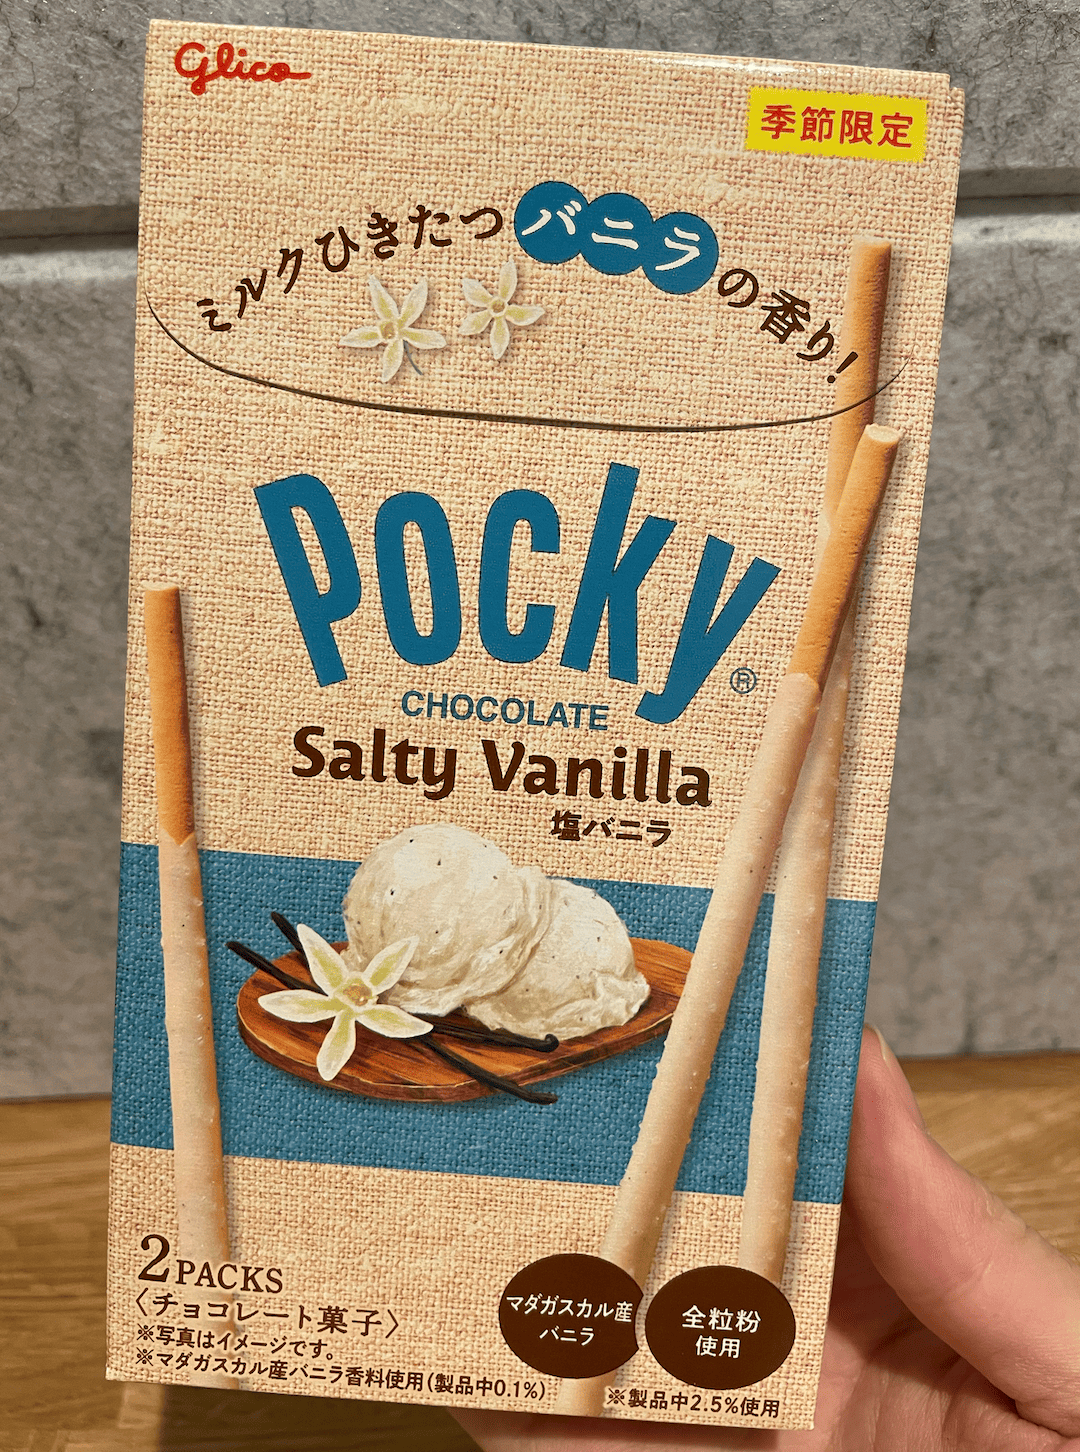 Actual product image of Salted Vanilla Pocky 1